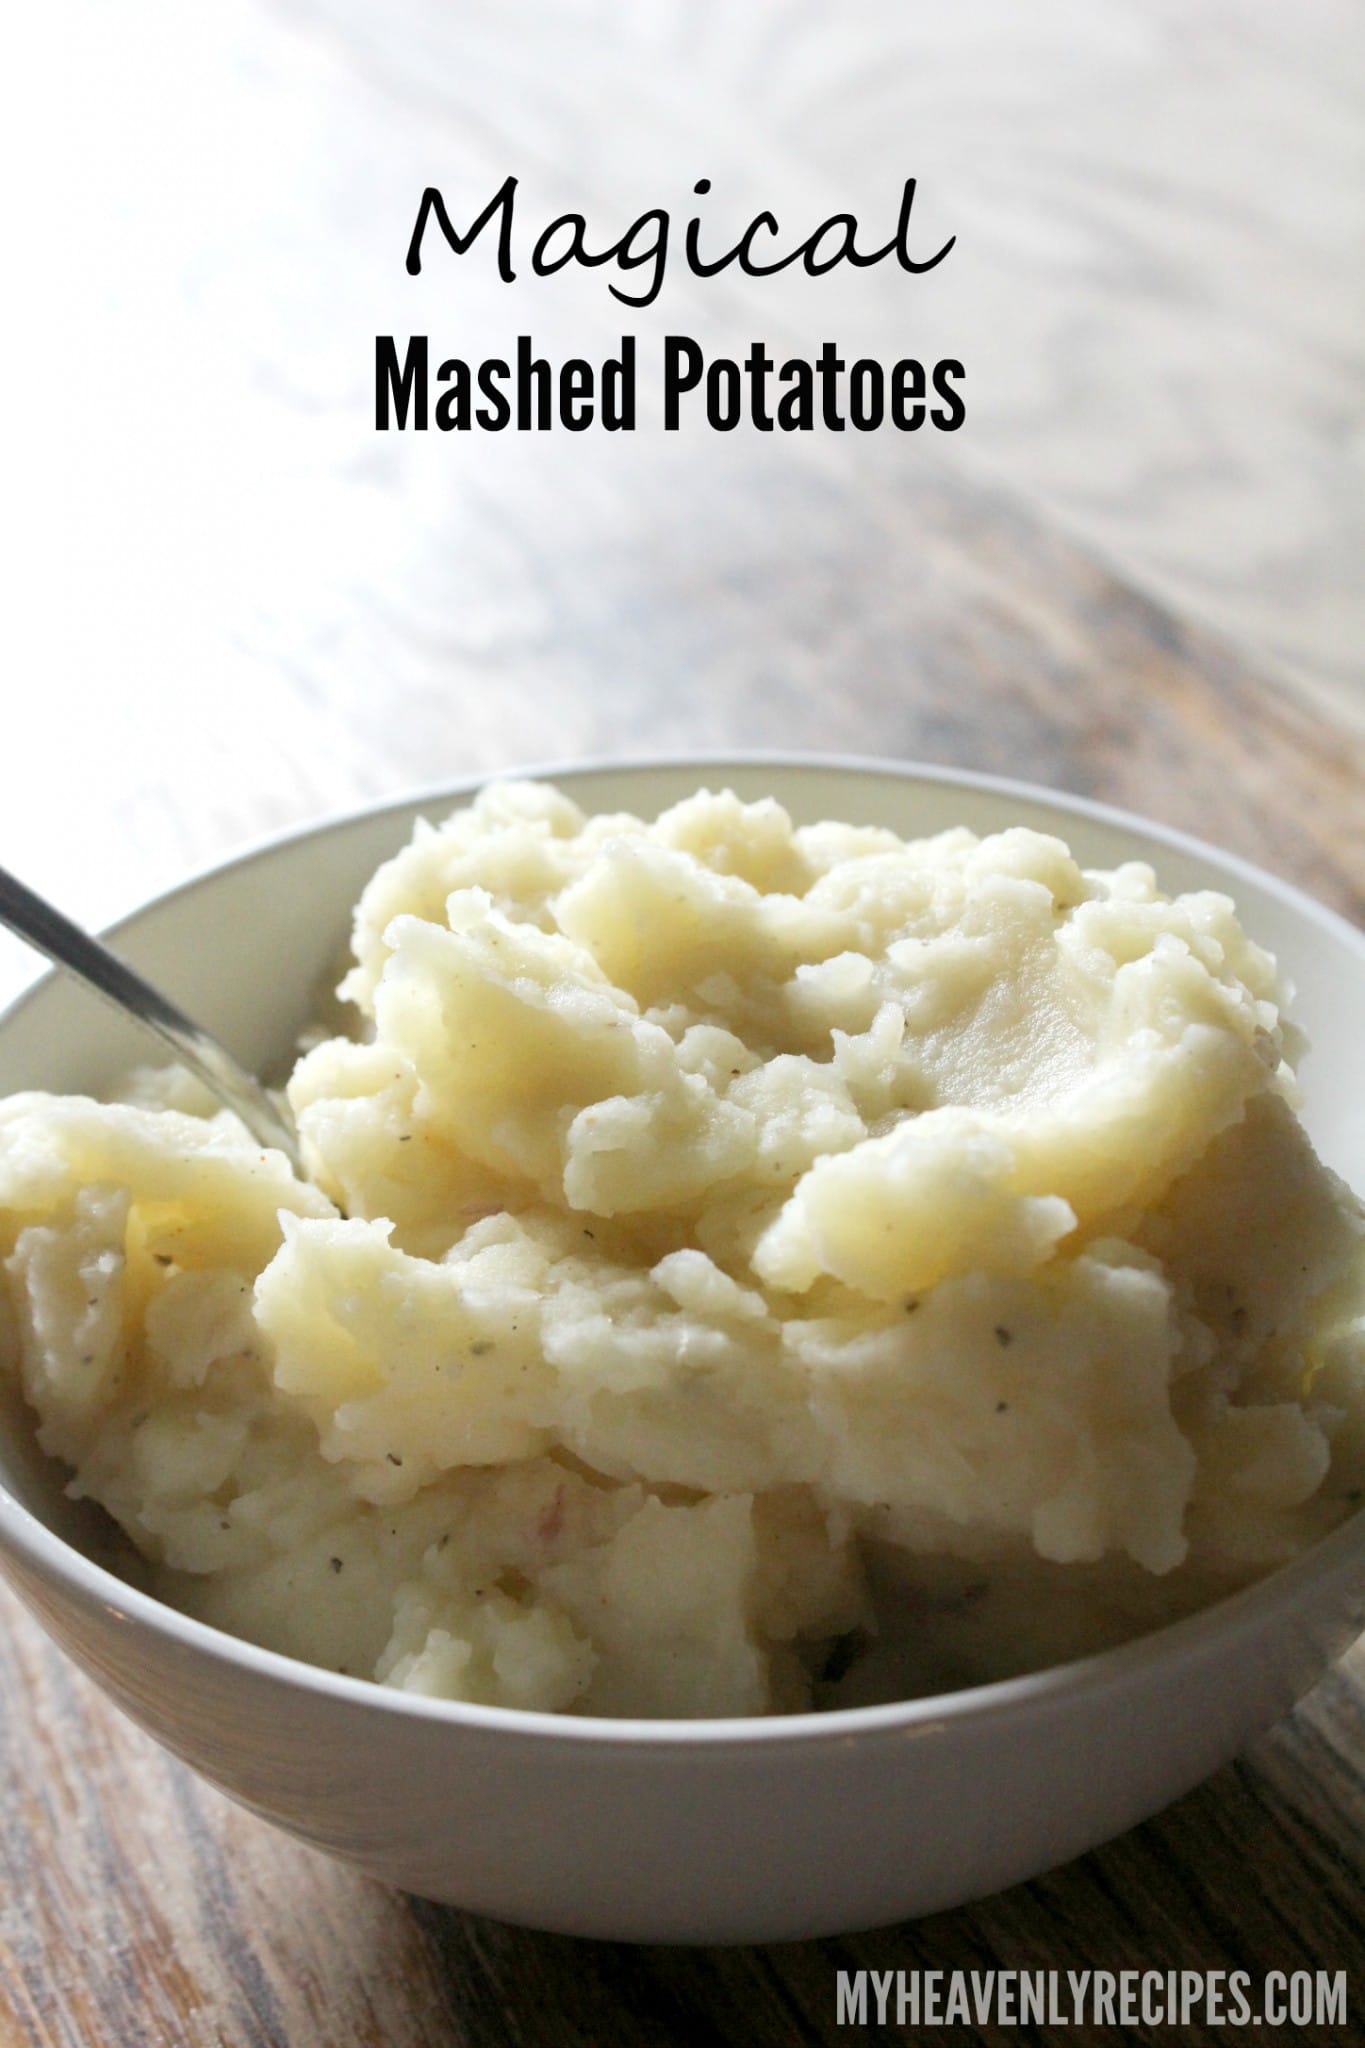 Best Recipe for Mashed Potatoes